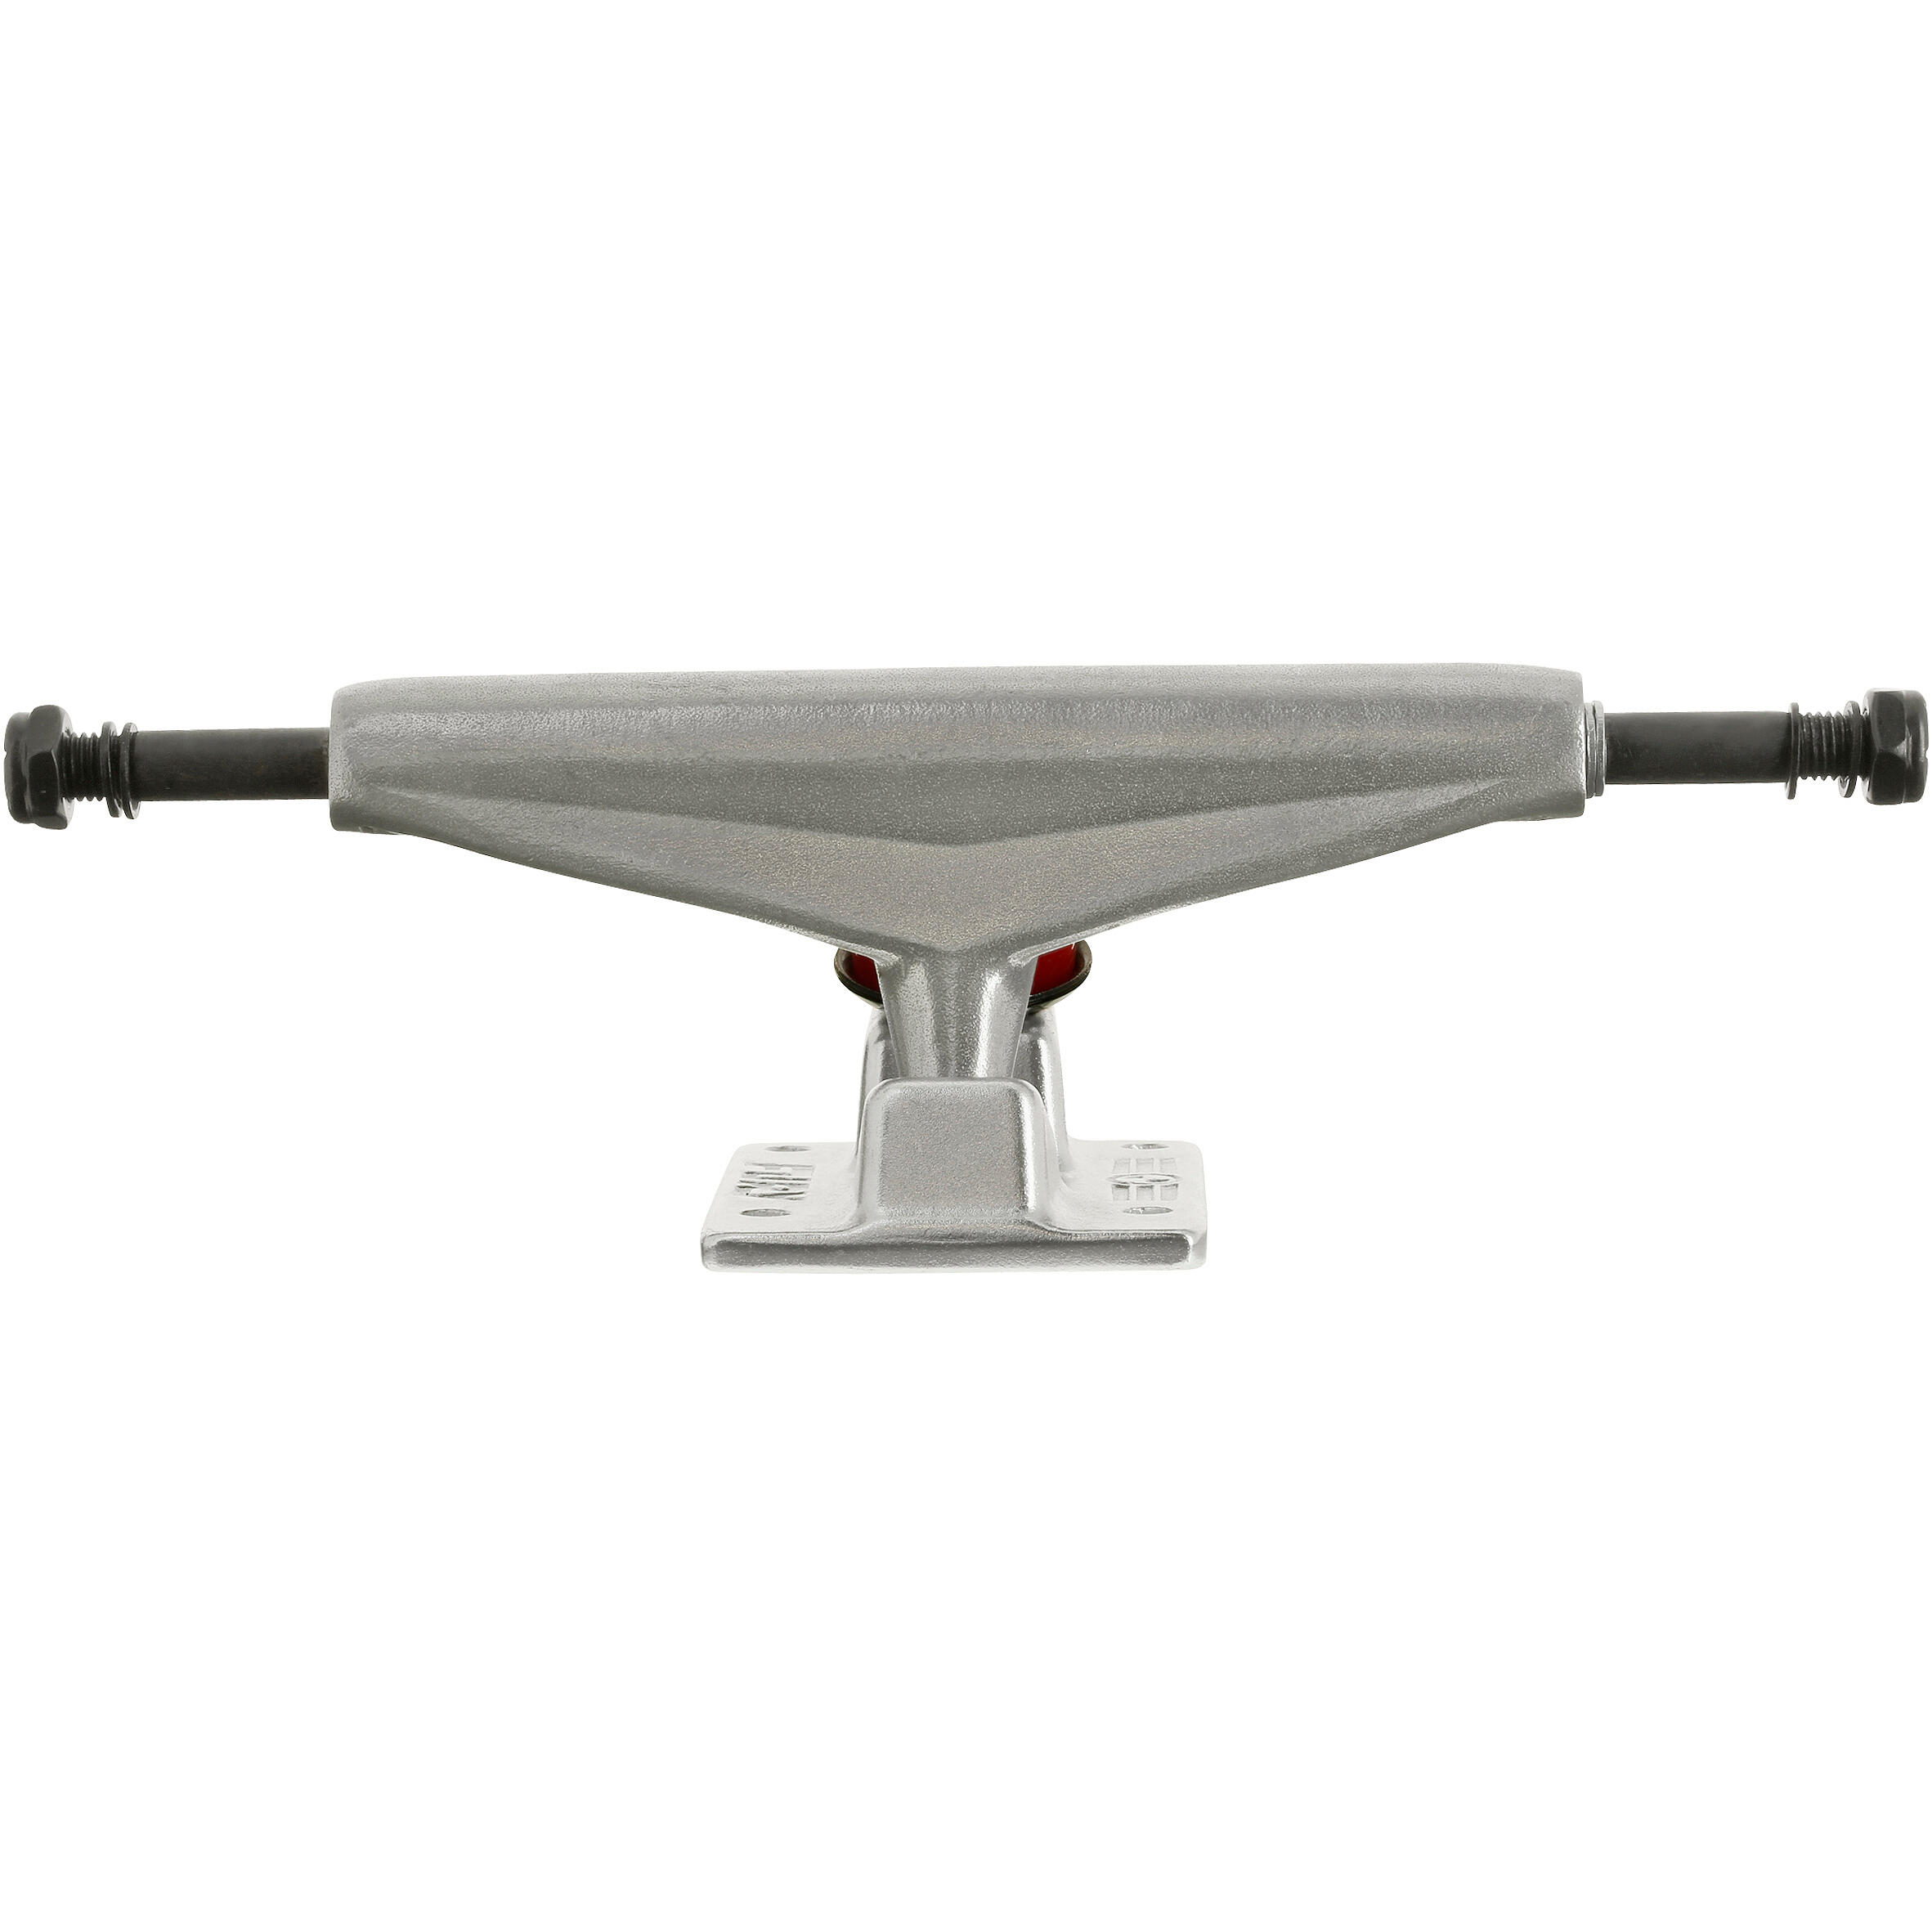 Fury Skateboard Forged Baseplate Truck Size 8.5" (21.59 mm) 1/16